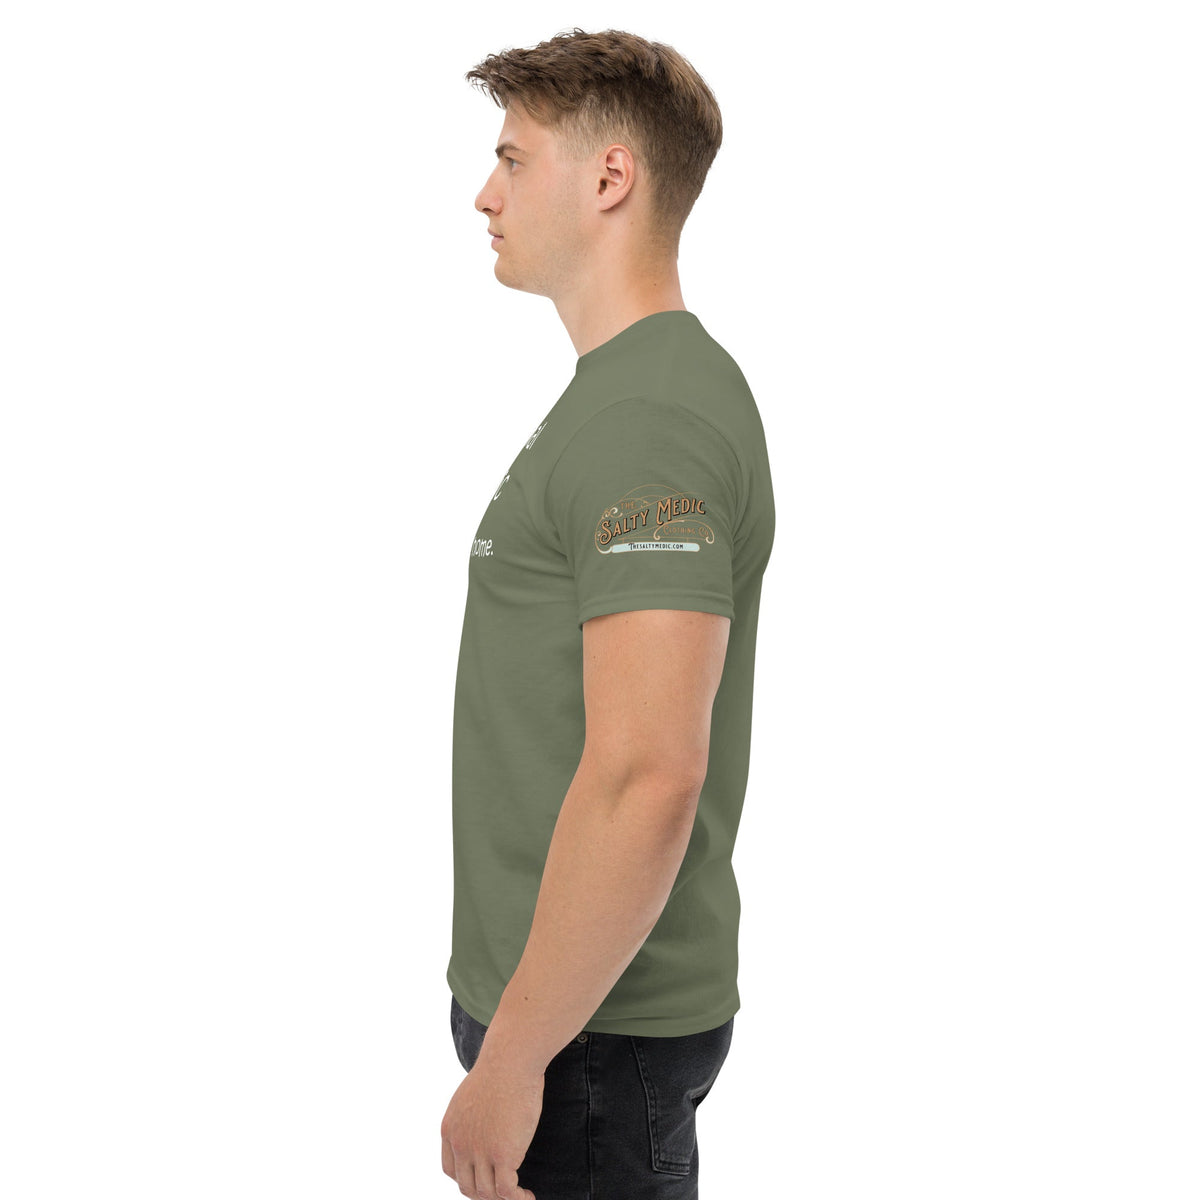 Professional Paramedic Men's classic tee - Salty Medic Clothing Co.